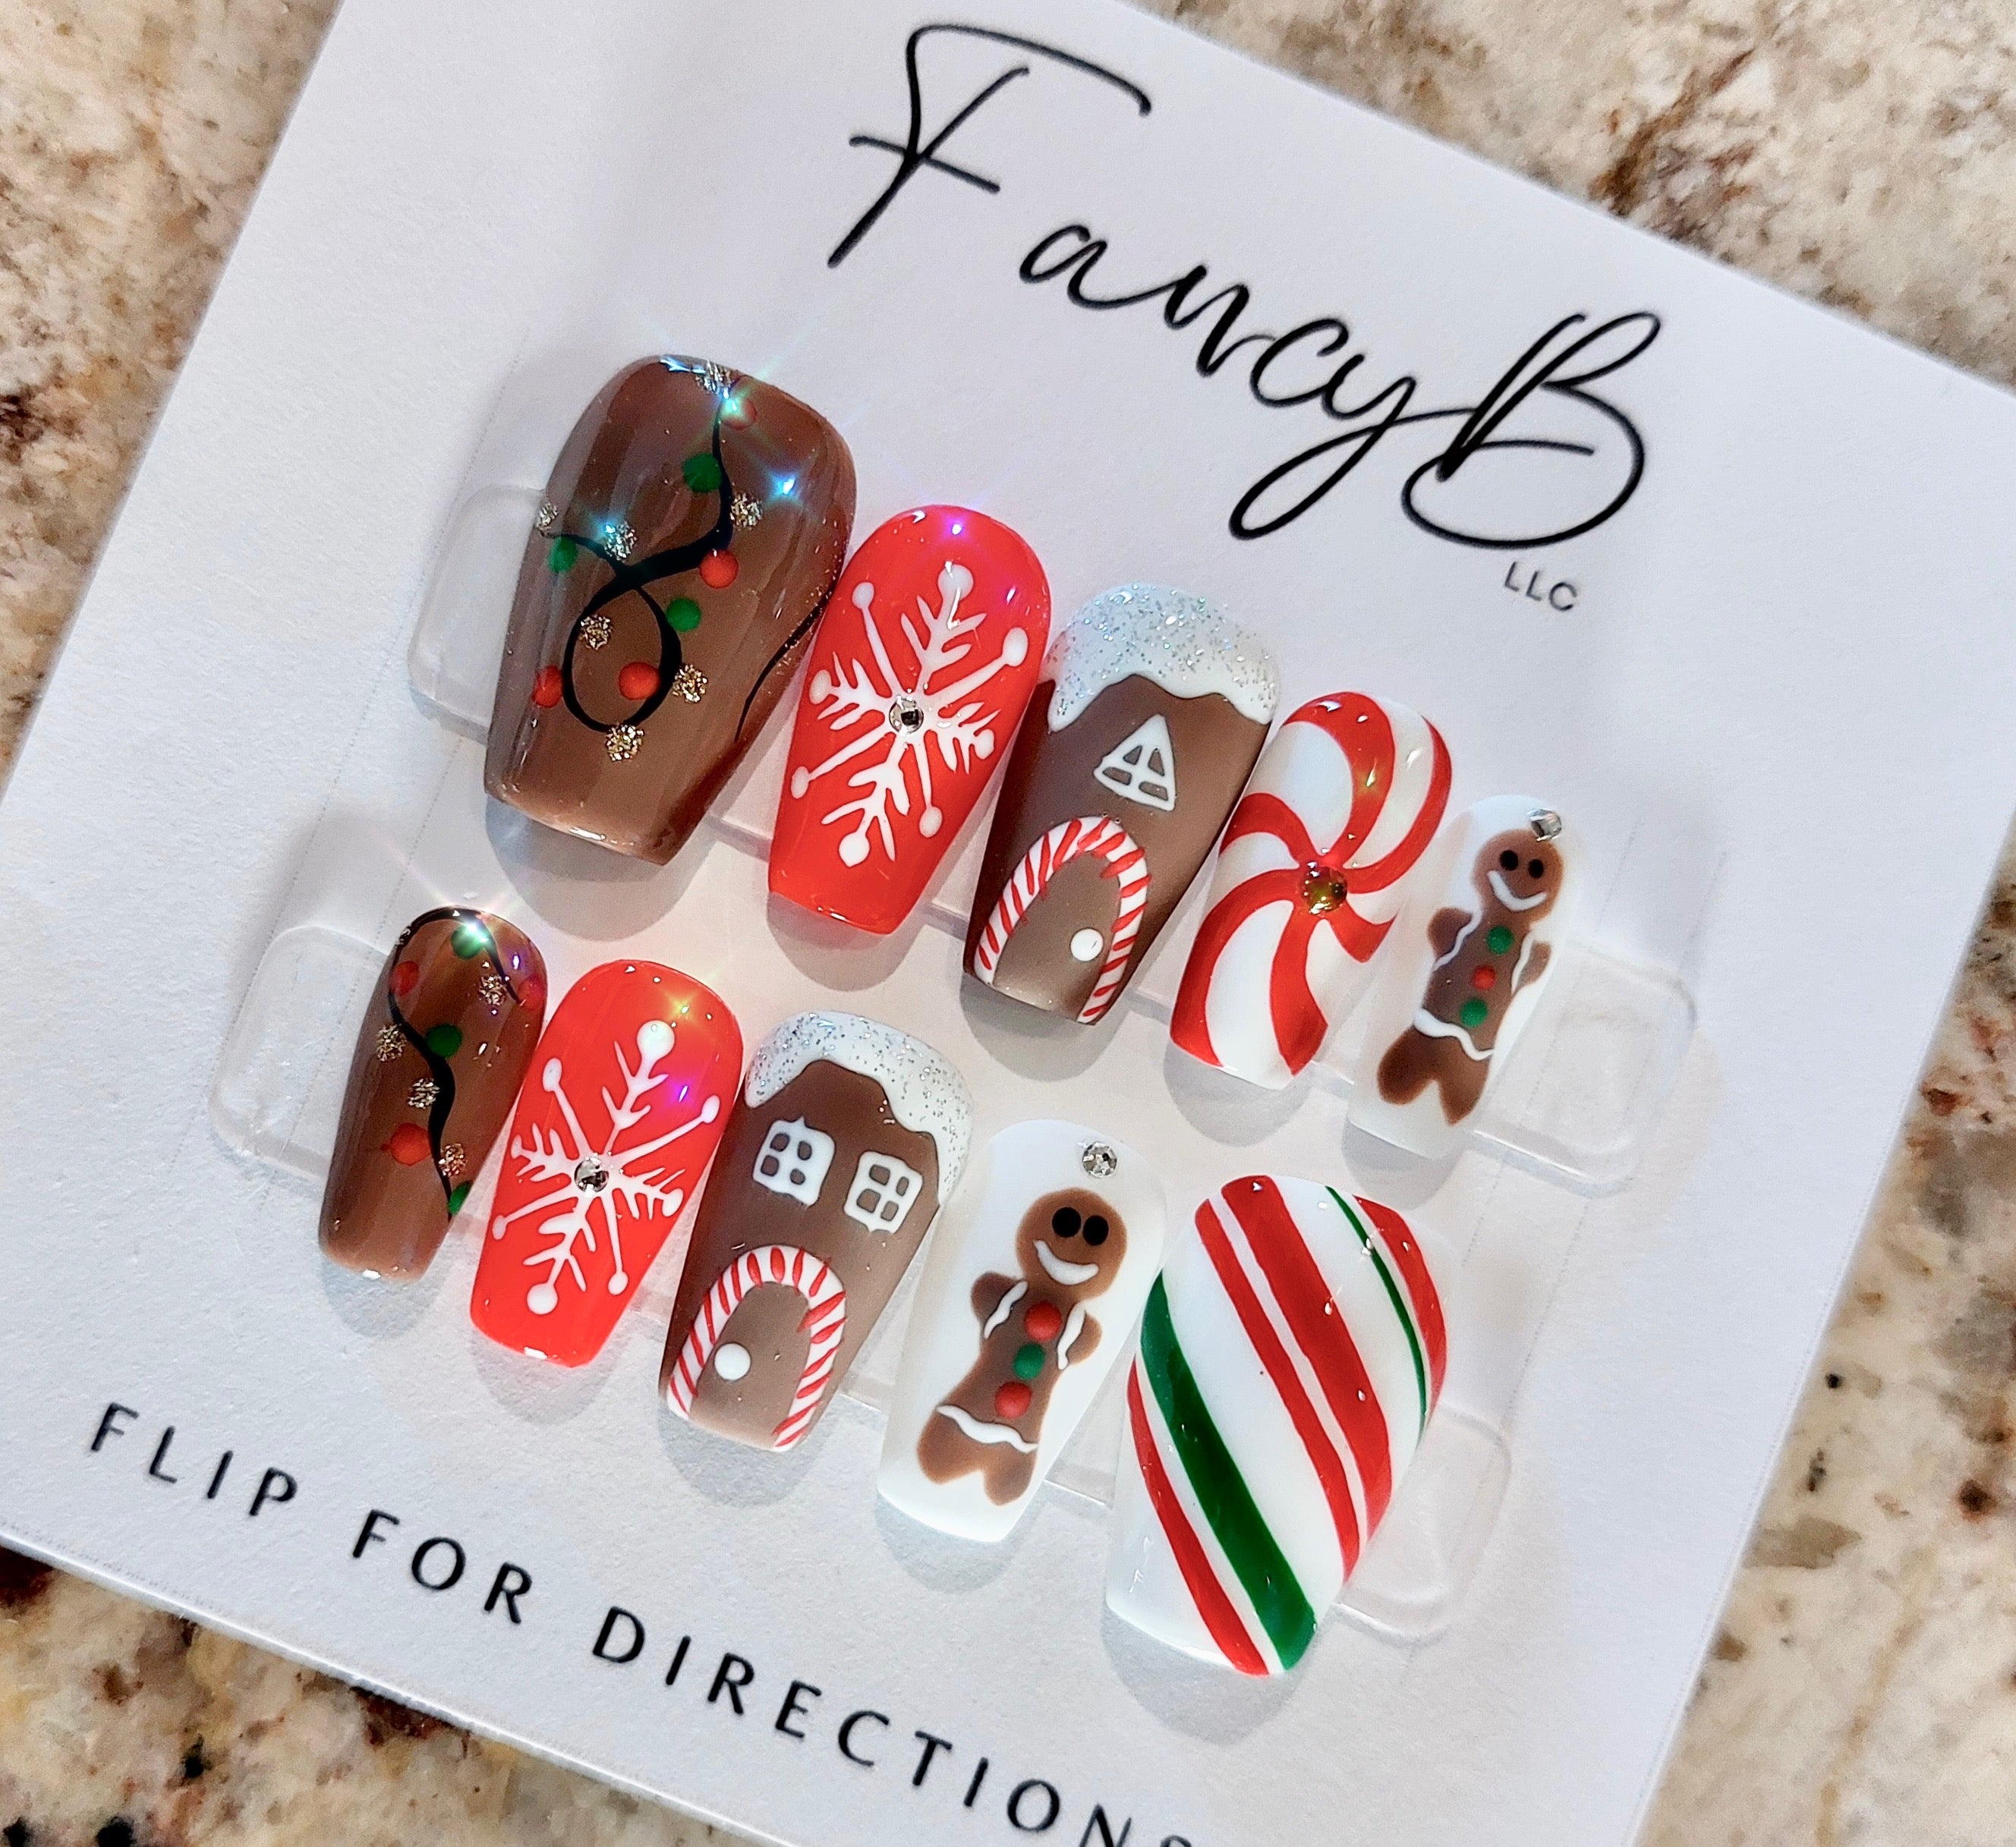 Custom Christmas Press on nails with gingerbread men, candycanes, gingerbread houses, snowflakes, and christmas lights on a short coffin shape. FancyB Nails.